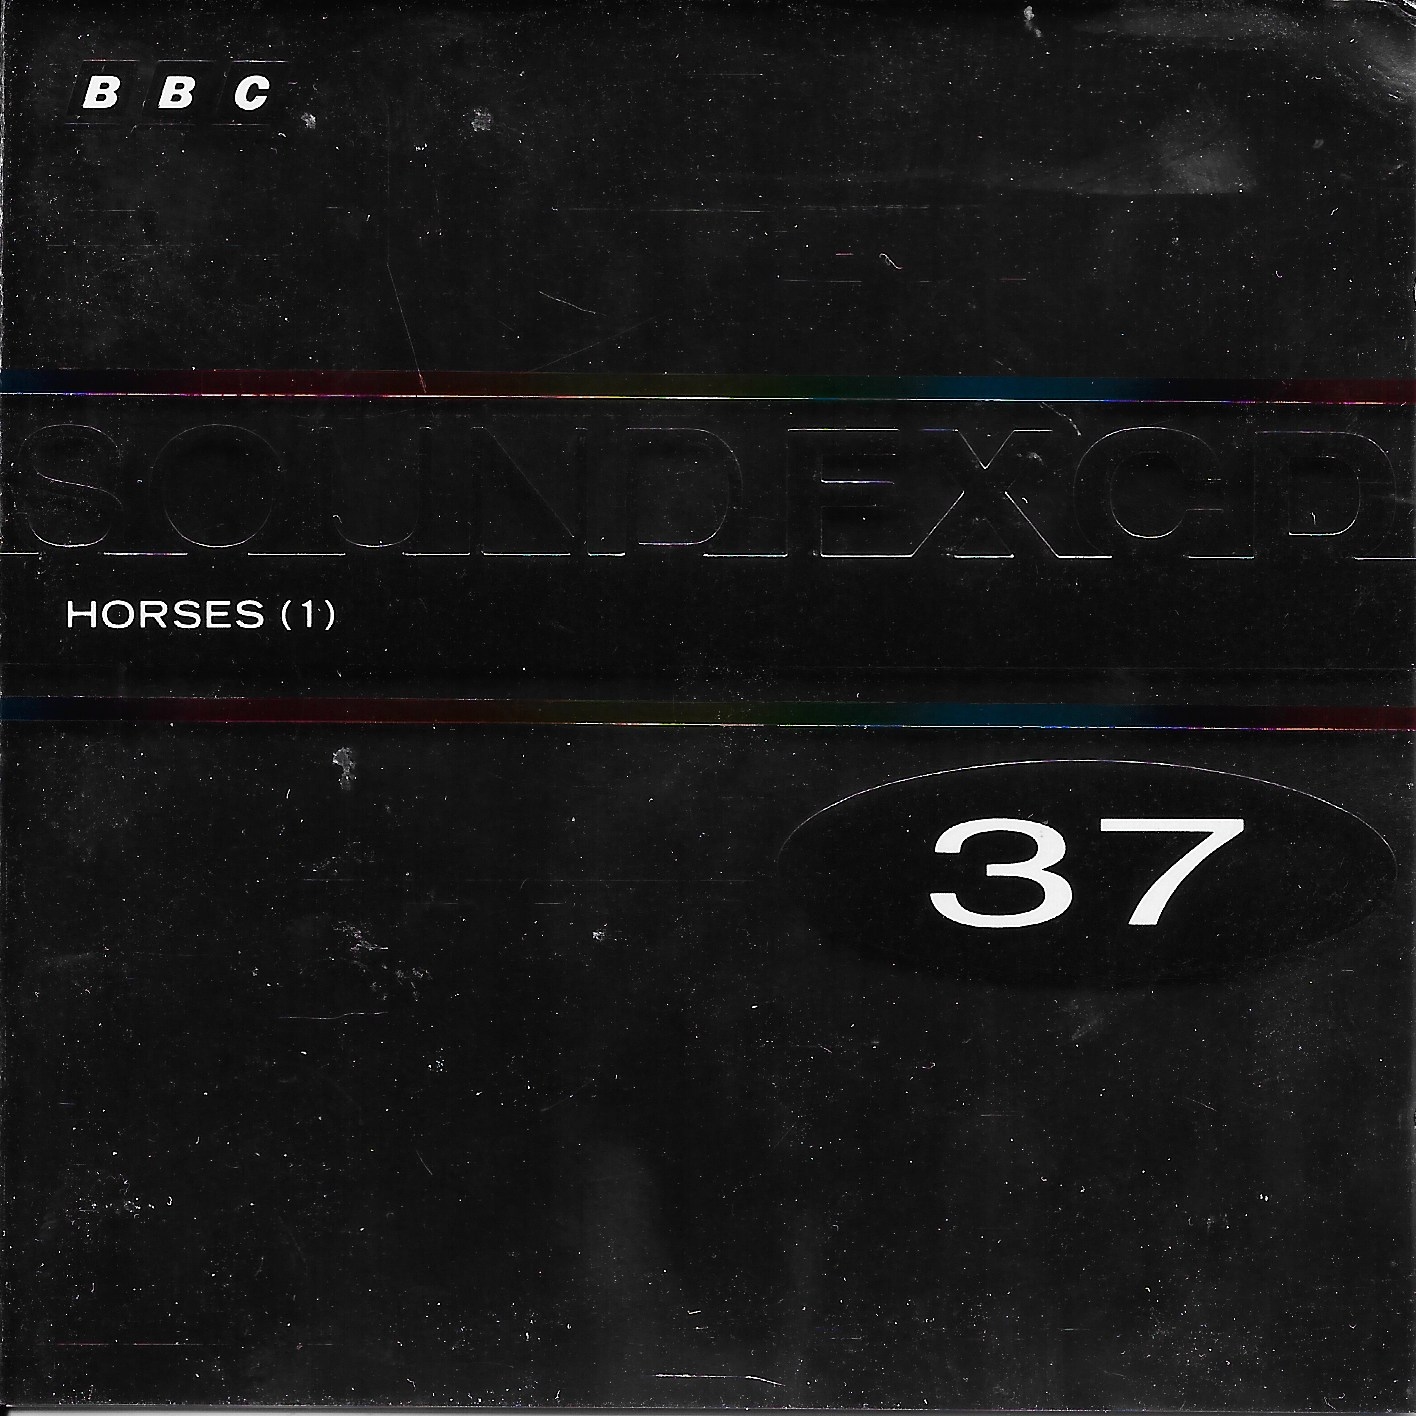 Picture of BBCCD SFX037 Horses (1) by artist Various from the BBC records and Tapes library